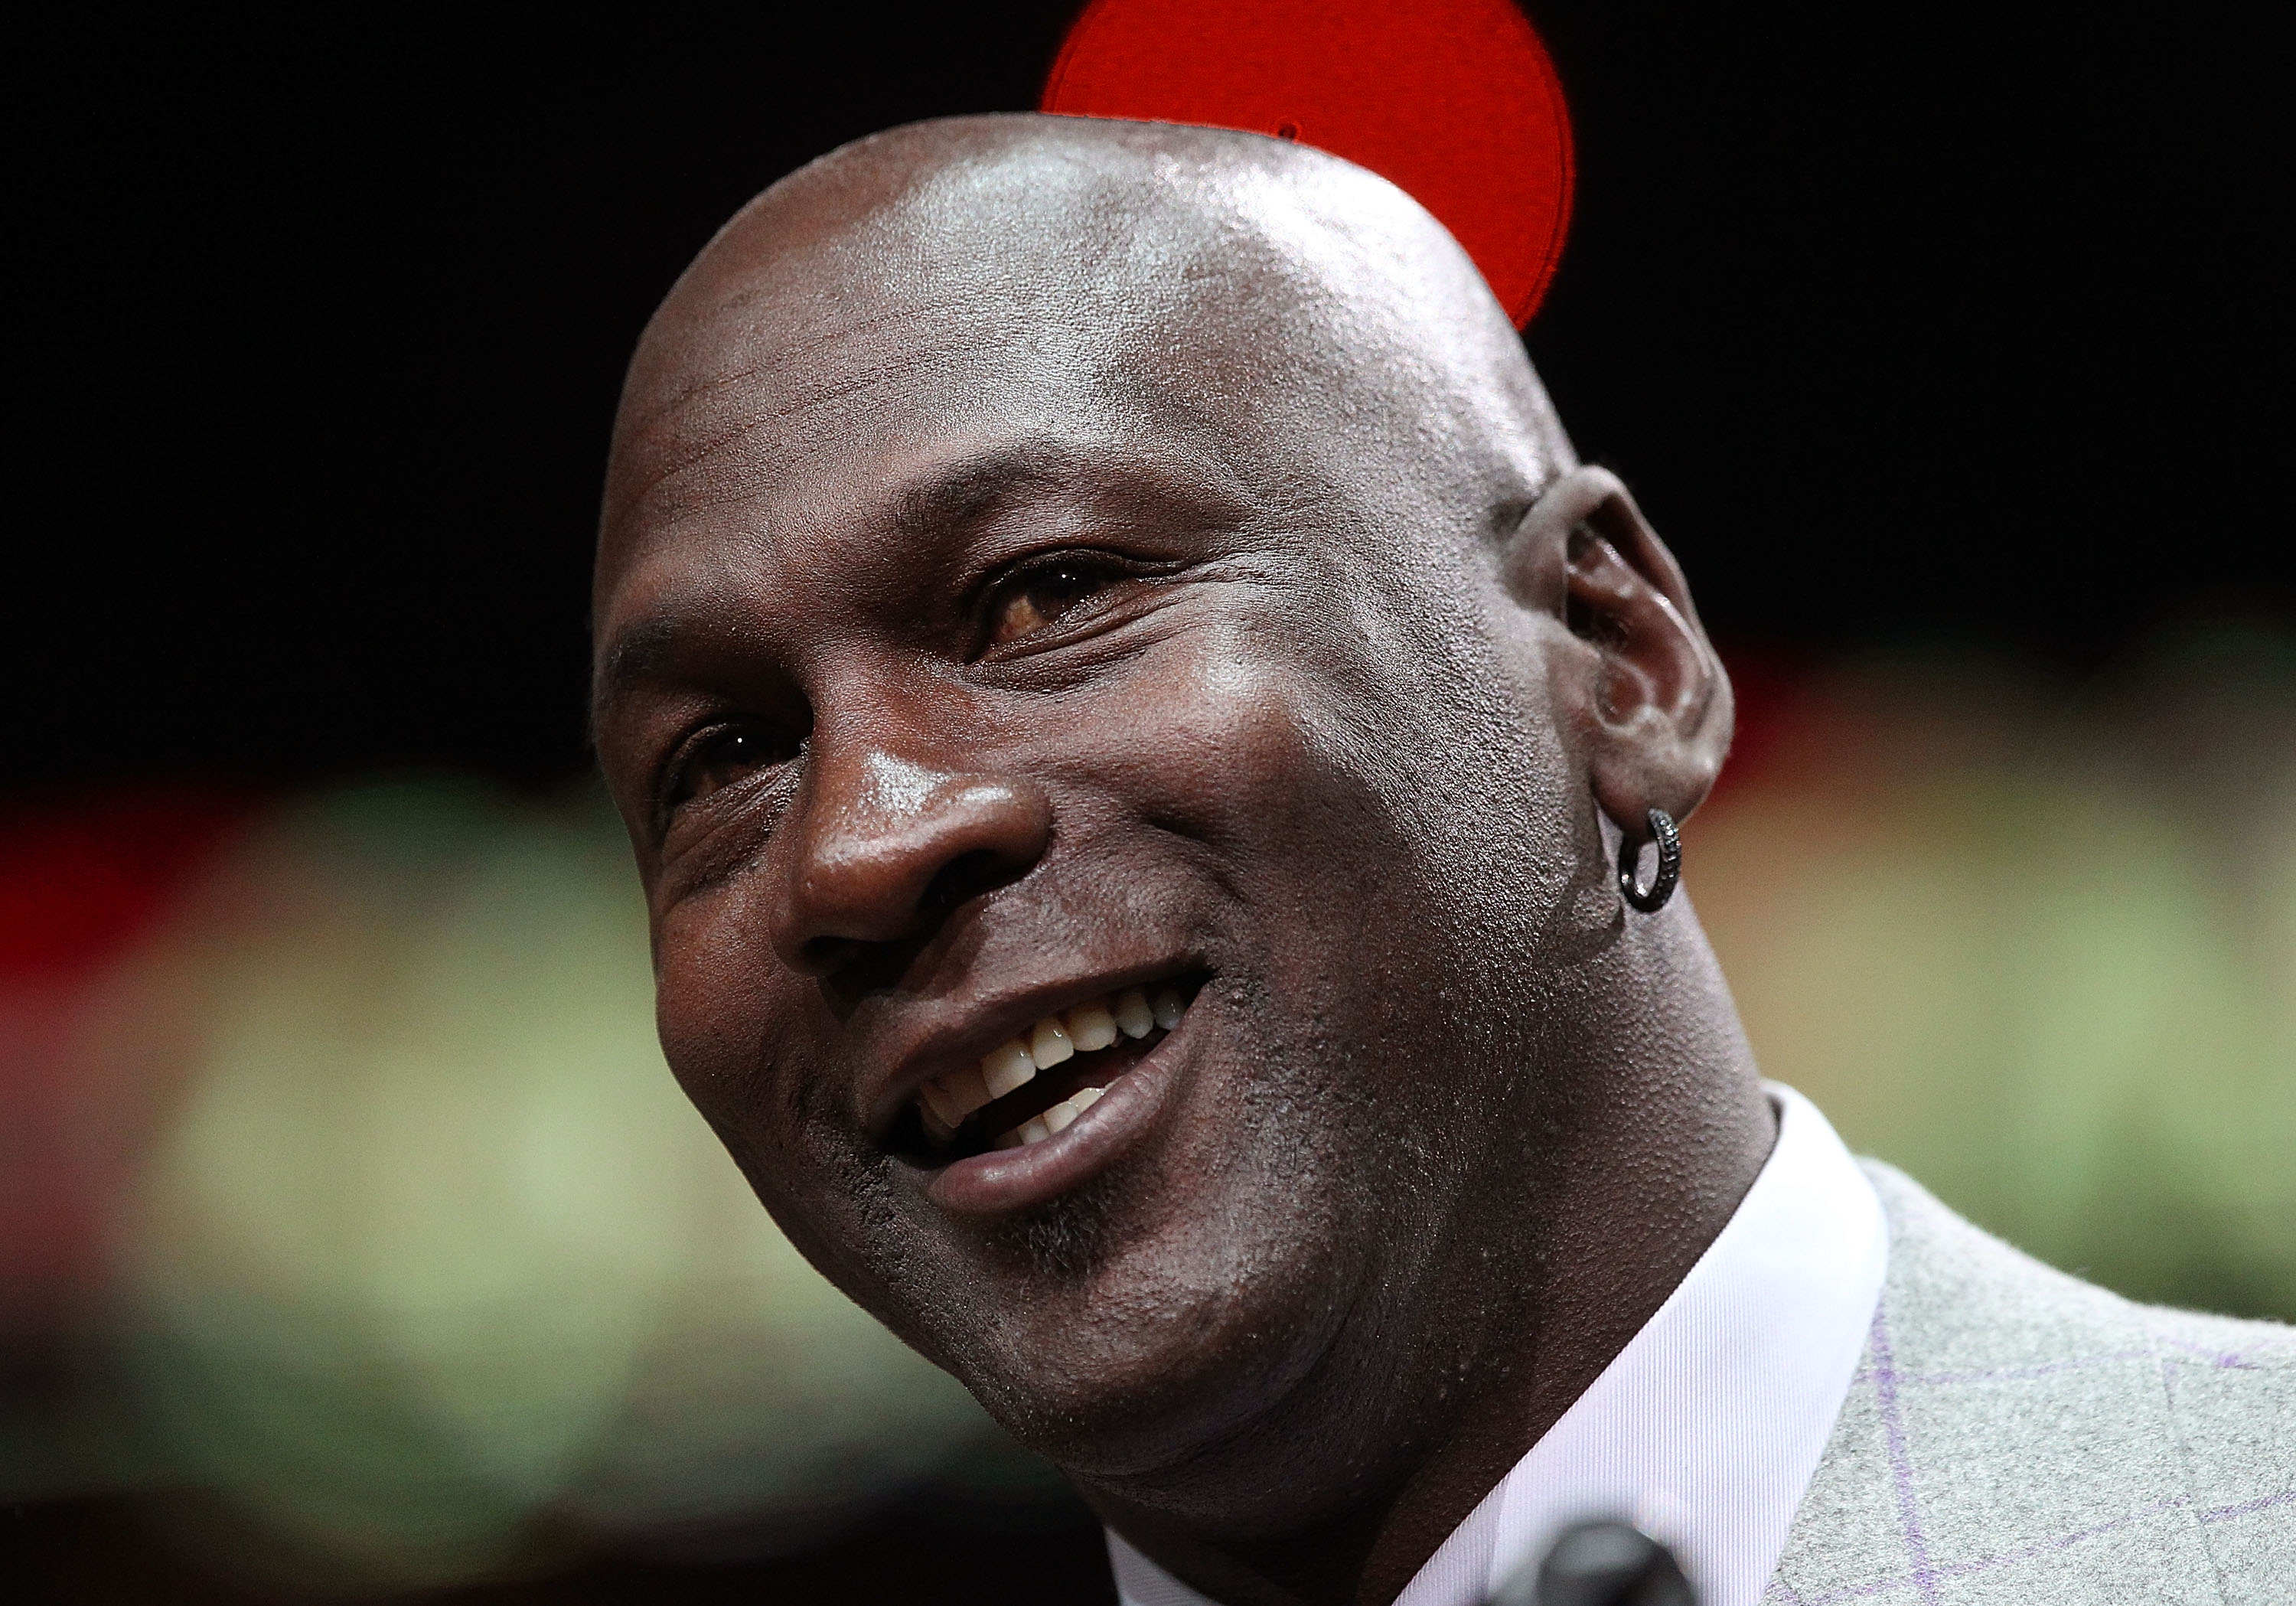 Michael Jordan at the 20th anniversary recognition ceremony of the Chicago Bulls' 1st NBA Championship in 1991, in Chicago, 2011 | Source: Getty Images